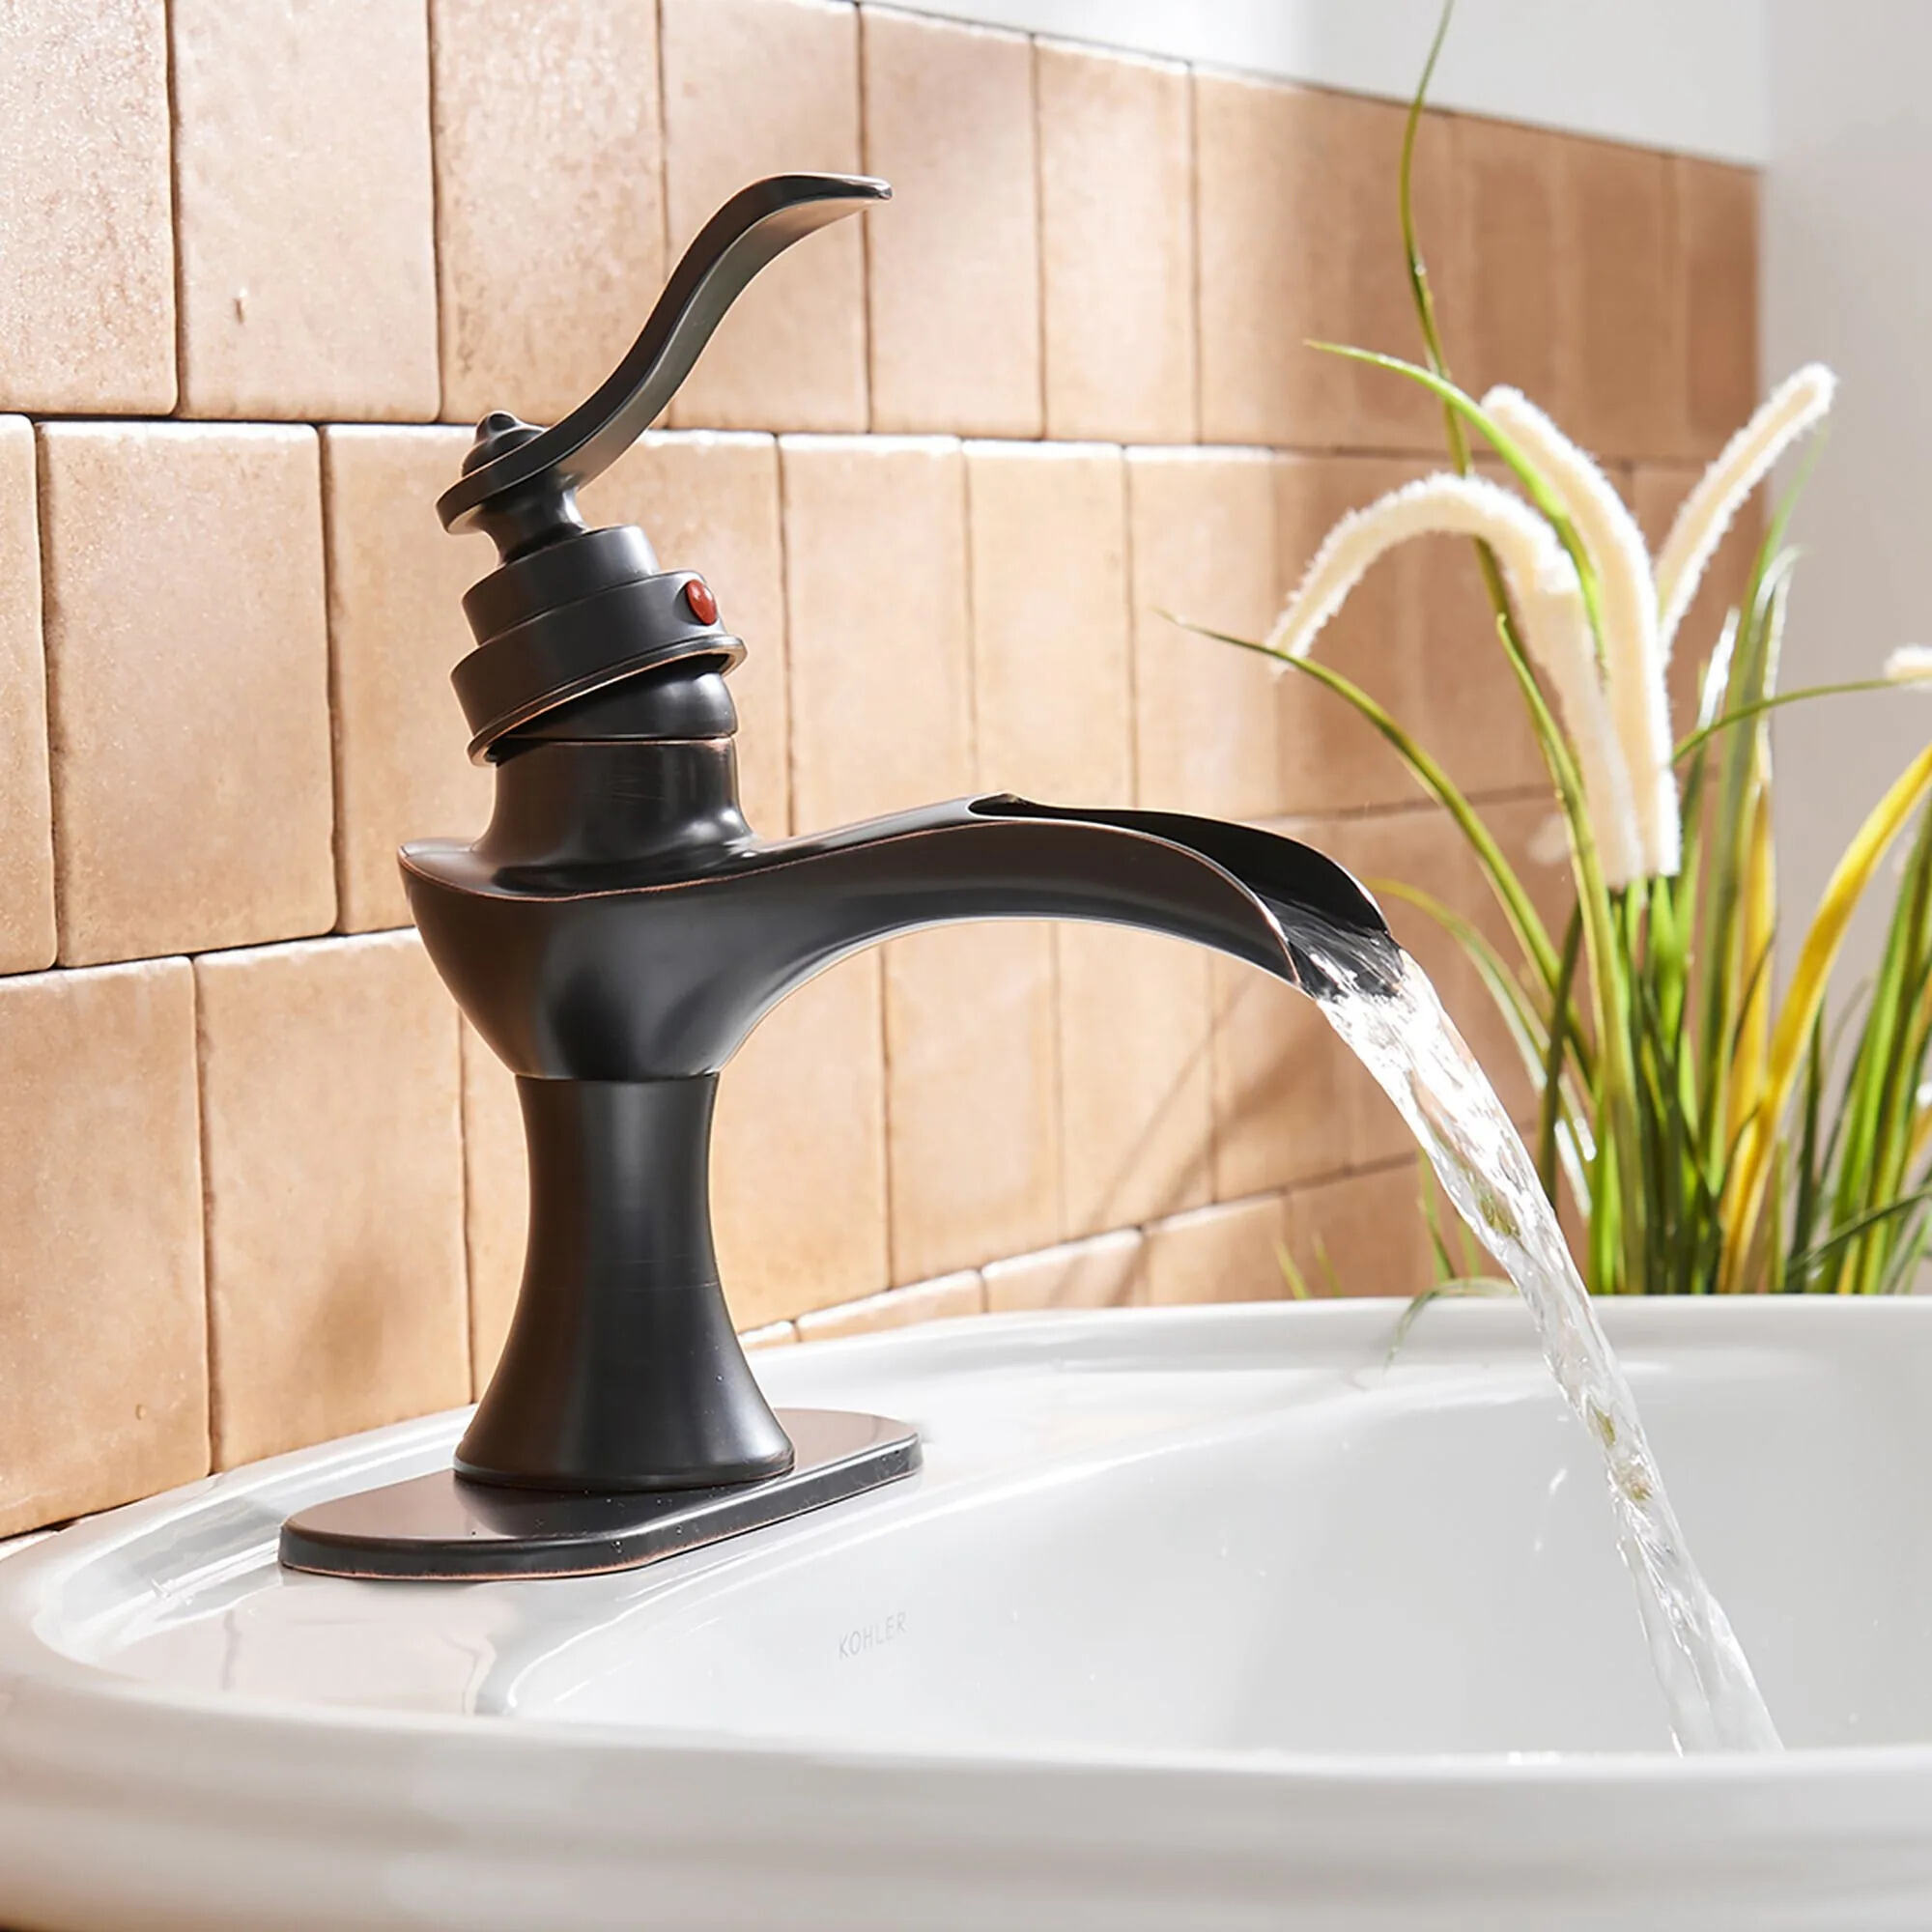 15 Amazing Oil Rubbed Bronze Faucet For 2023 1693406037 